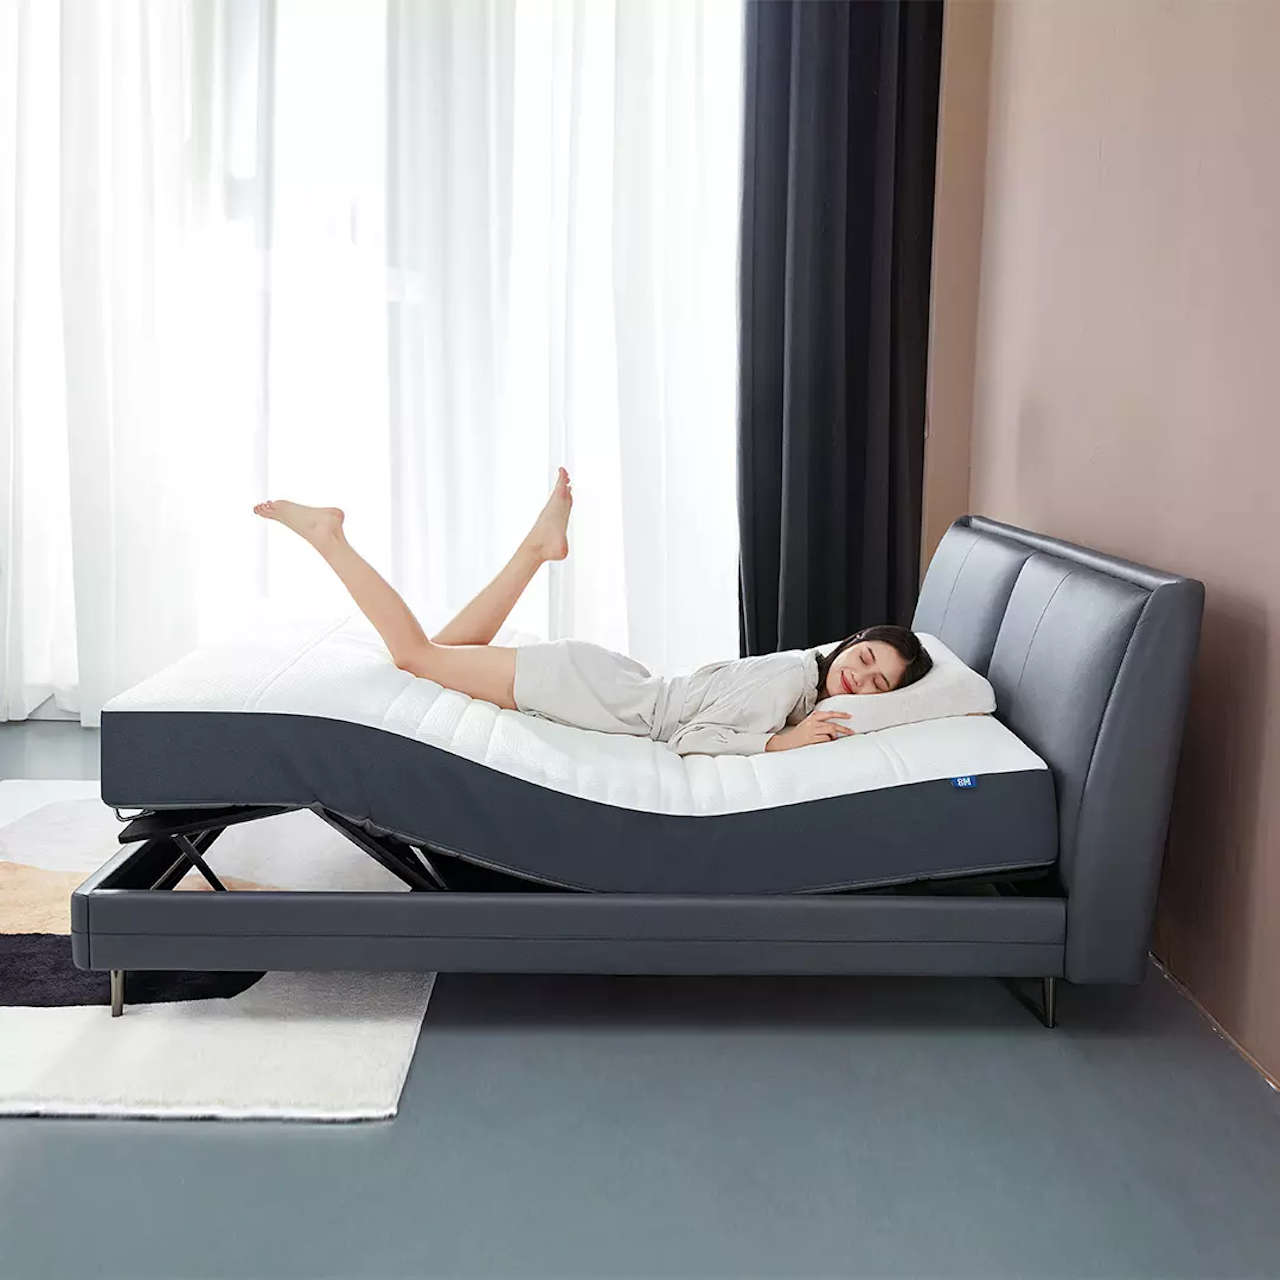 xiaomi letto 8h milan smart electric bed pro